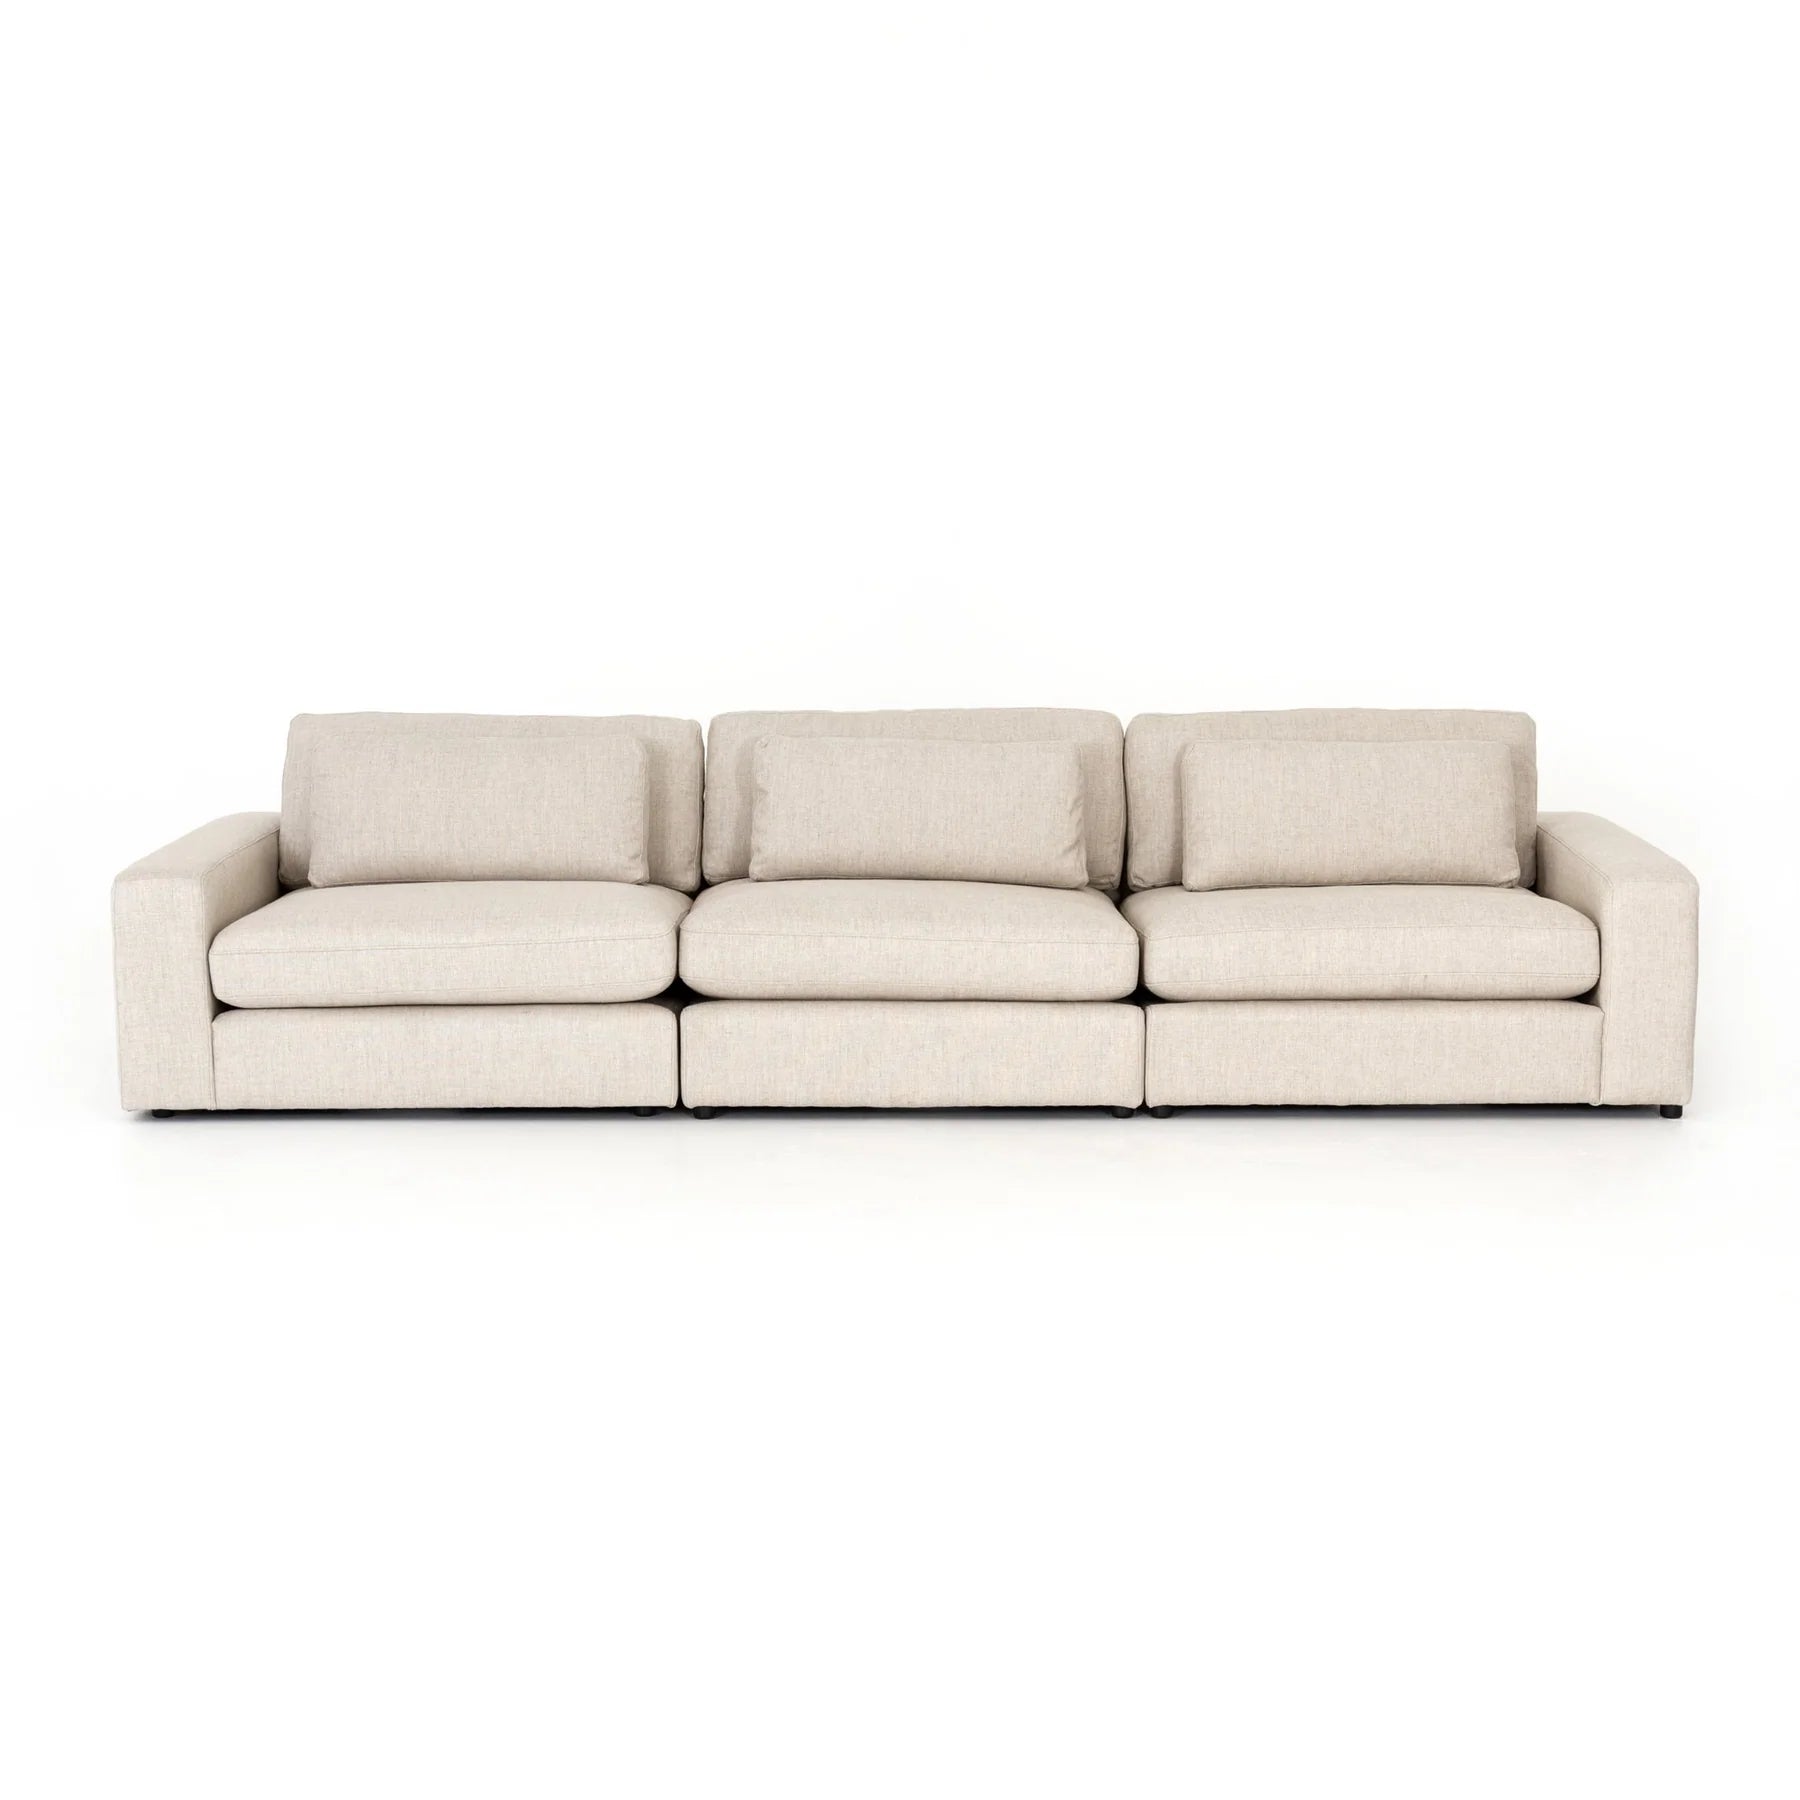 BLOOR 3 PIECE SECTIONAL IN ESSENCE NATURAL